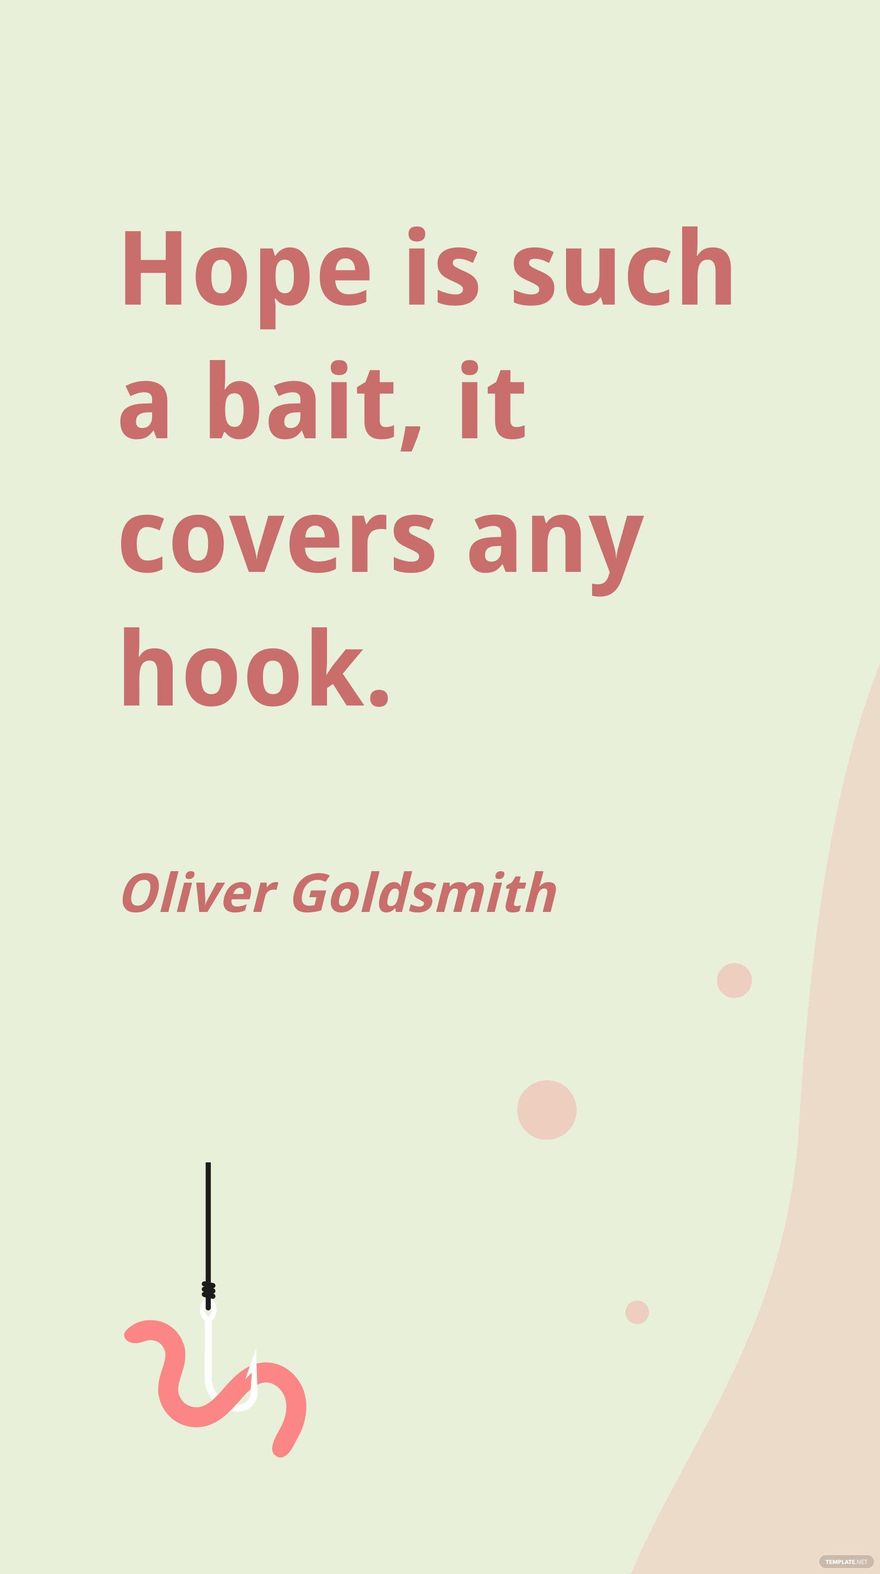 Oliver Goldsmith - Hope is such a bait, it covers any hook.